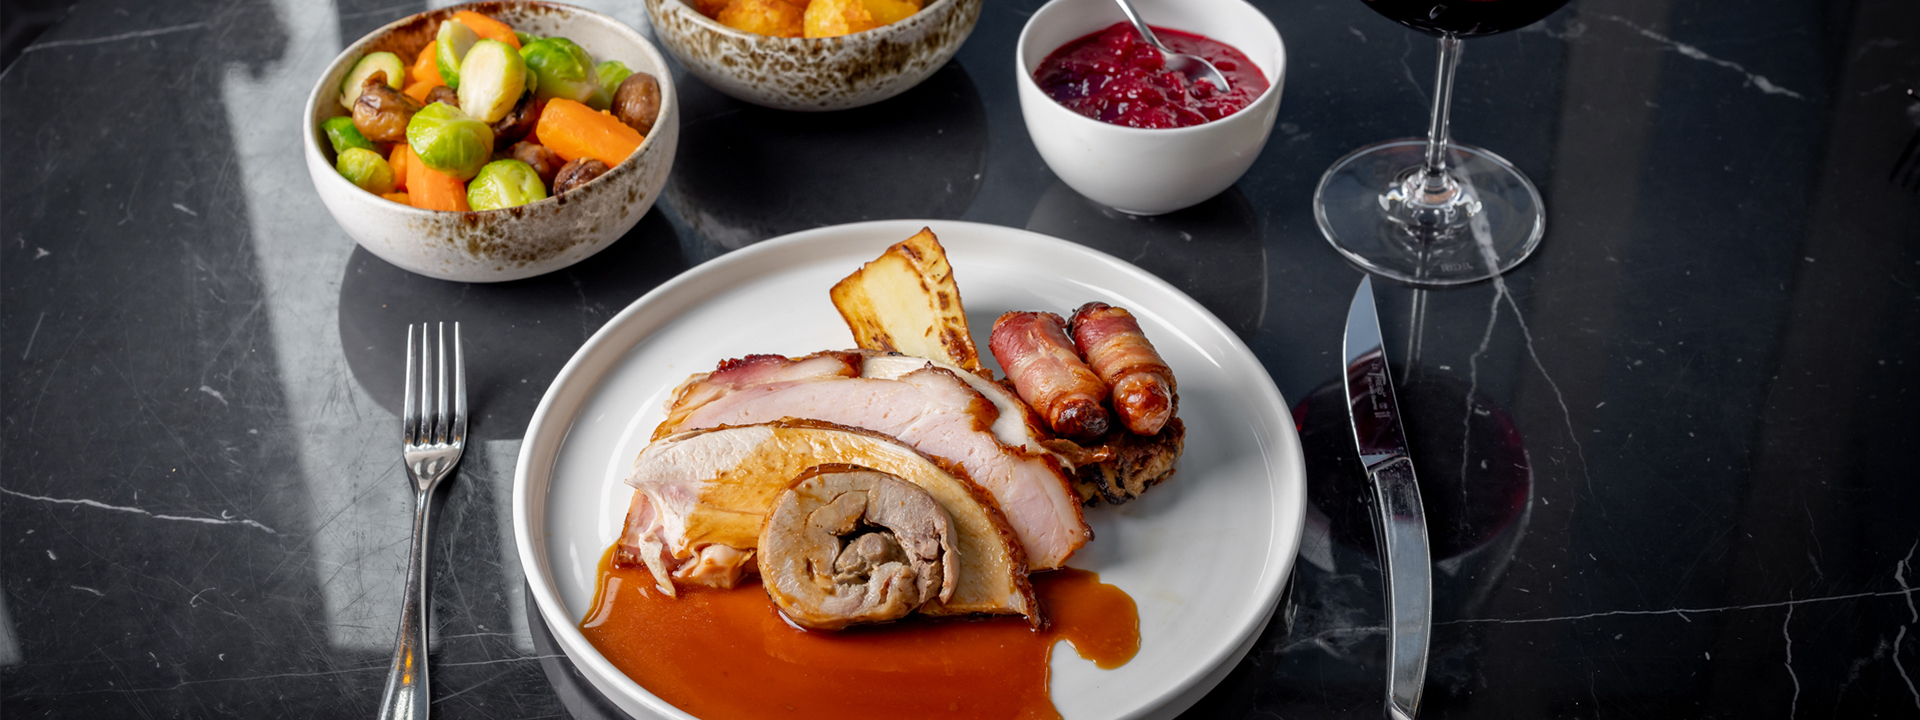 One of the delicious dishes from the festive menu at The Connaught, roast bronze turkey and ham with cranberry sauce.